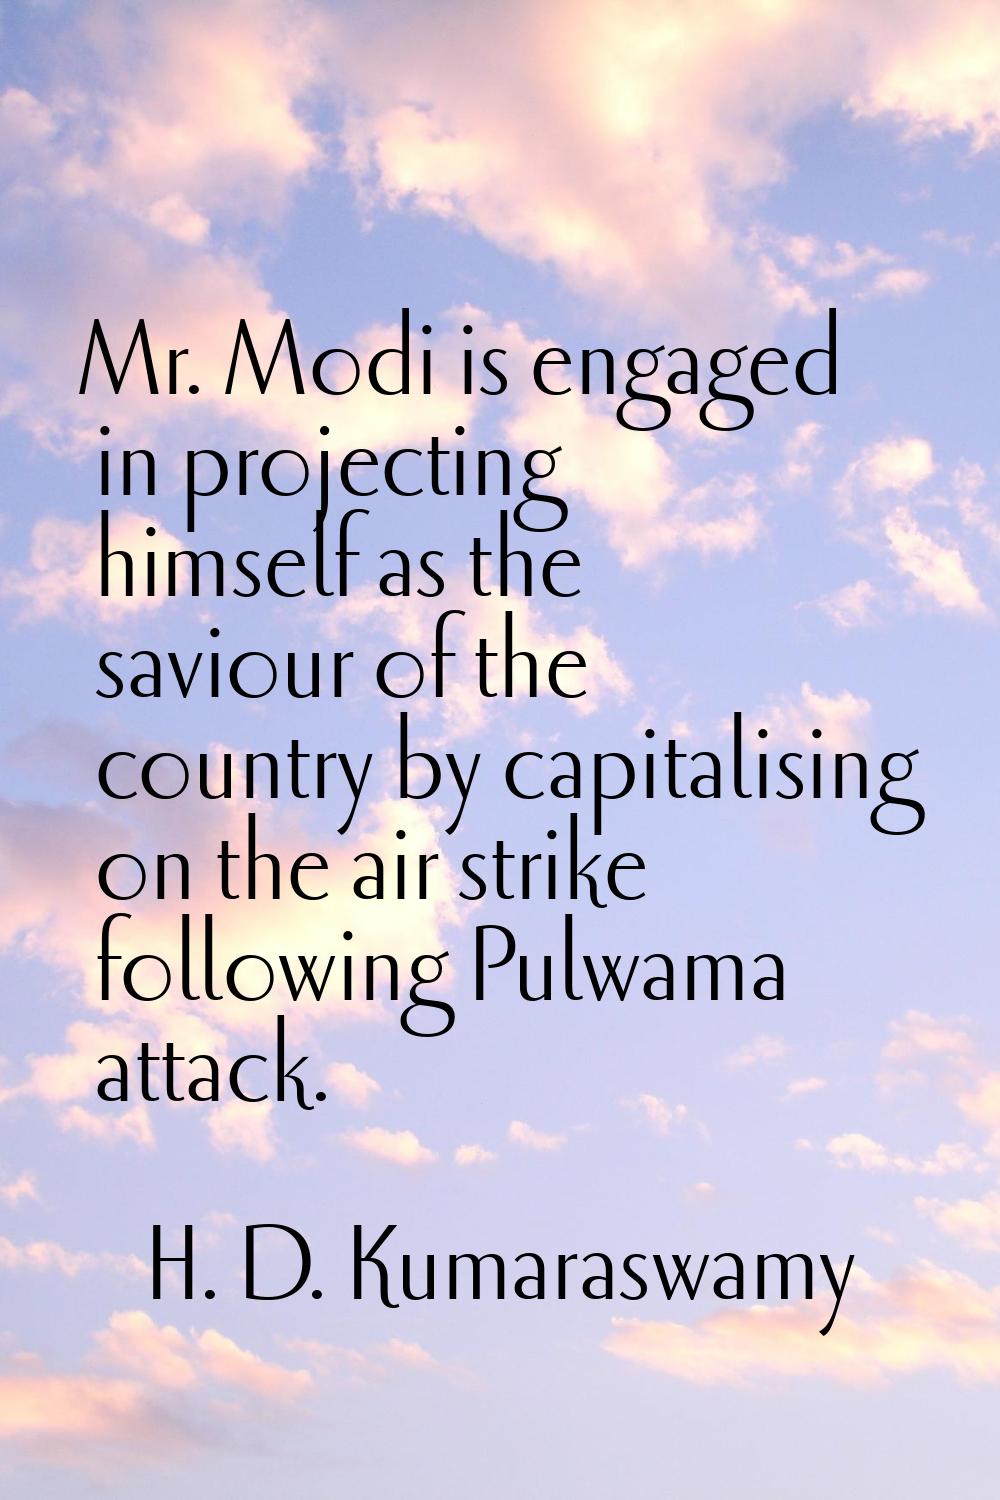 Mr. Modi is engaged in projecting himself as the saviour of the country by capitalising on the air 